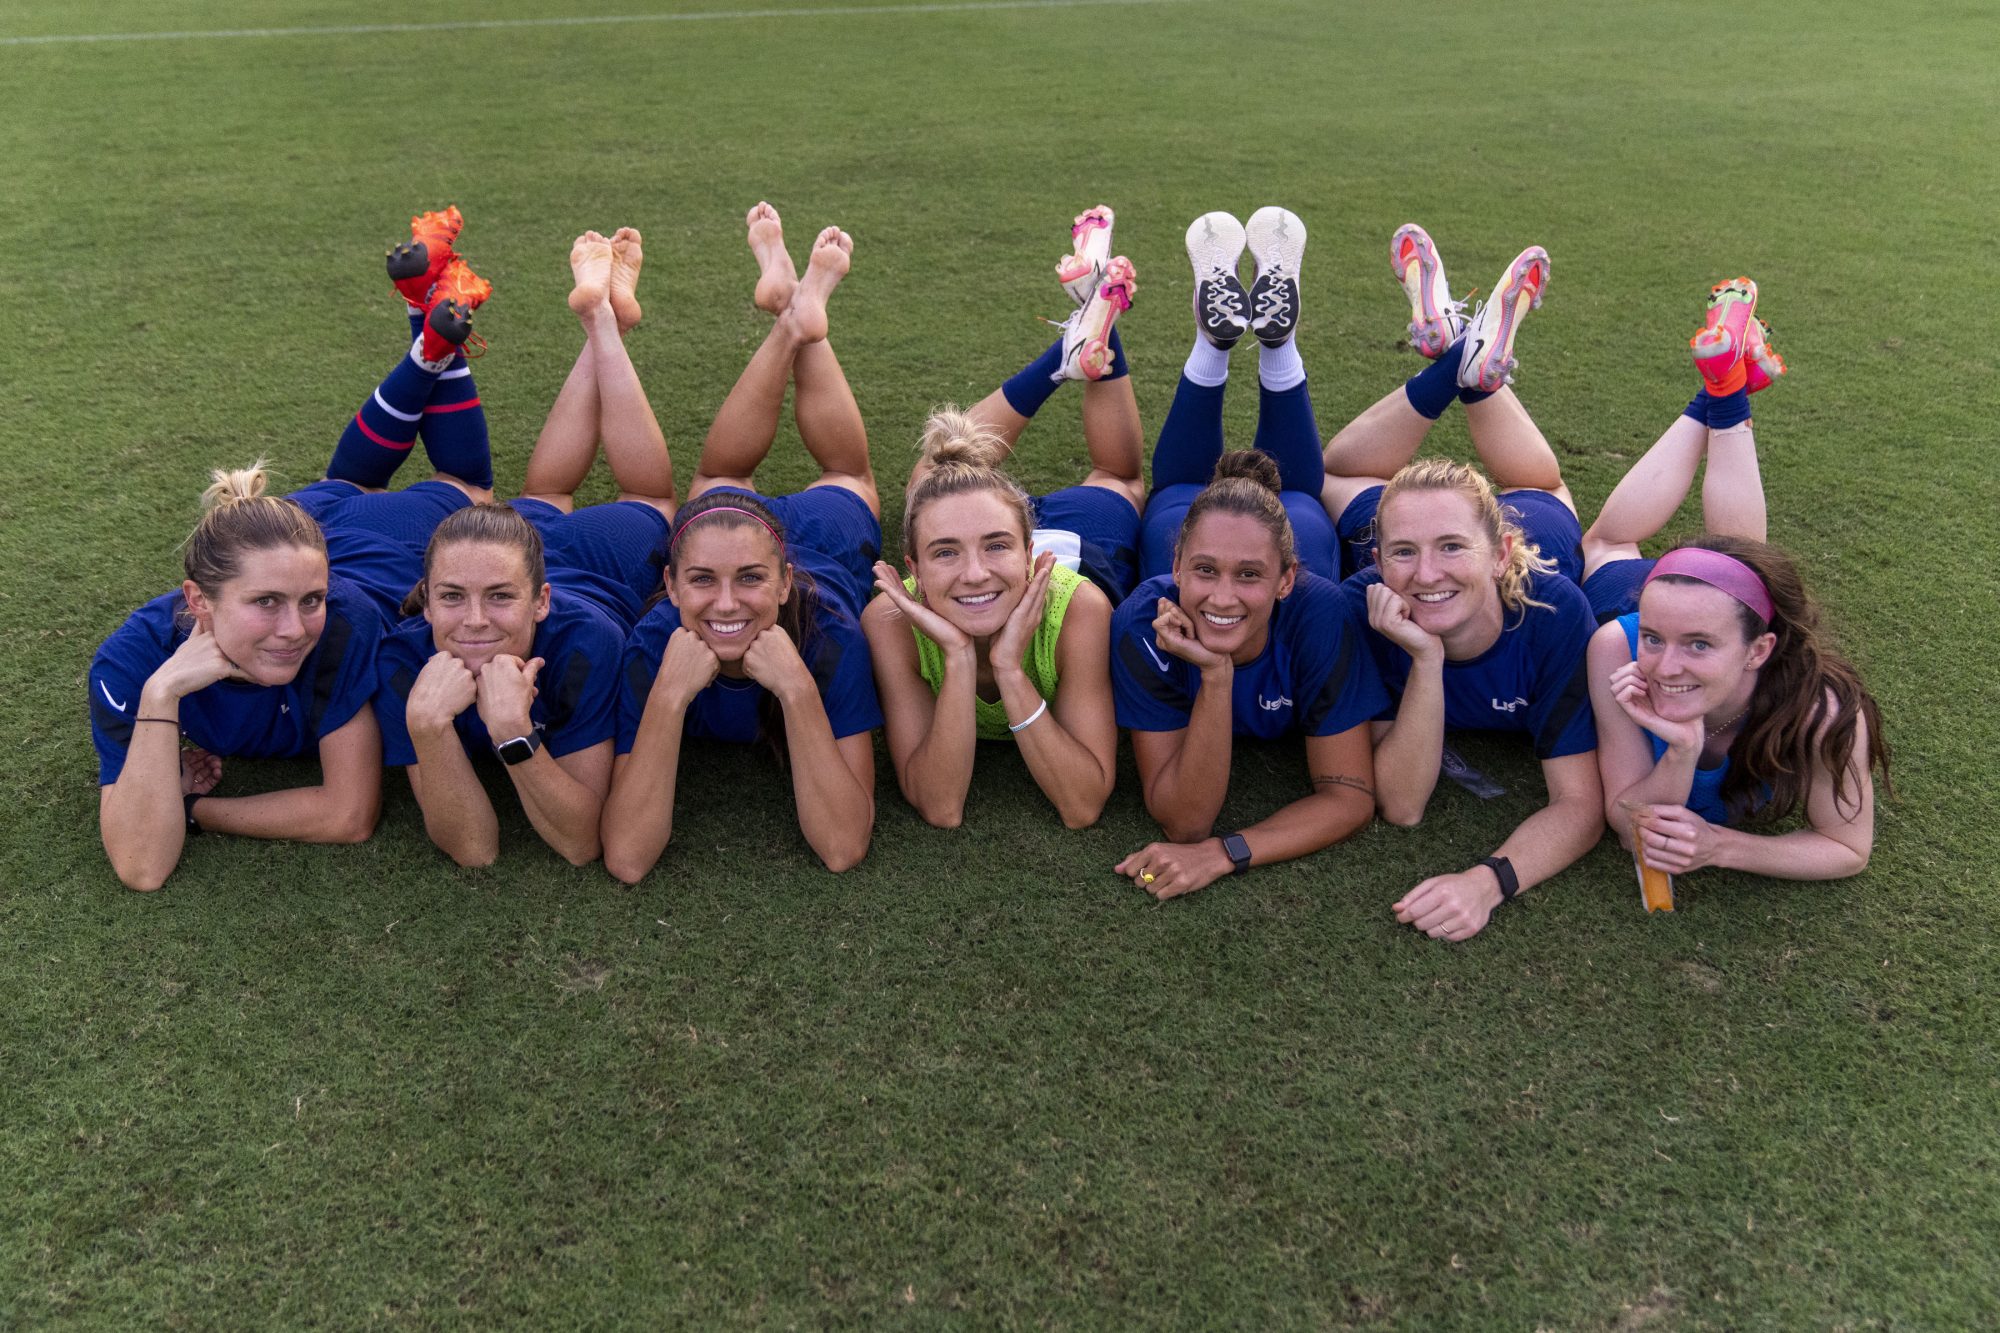 Women's Soccer, a $1 Million Donation and a Warehouse Job Claim the Podium  - Ms. Magazine